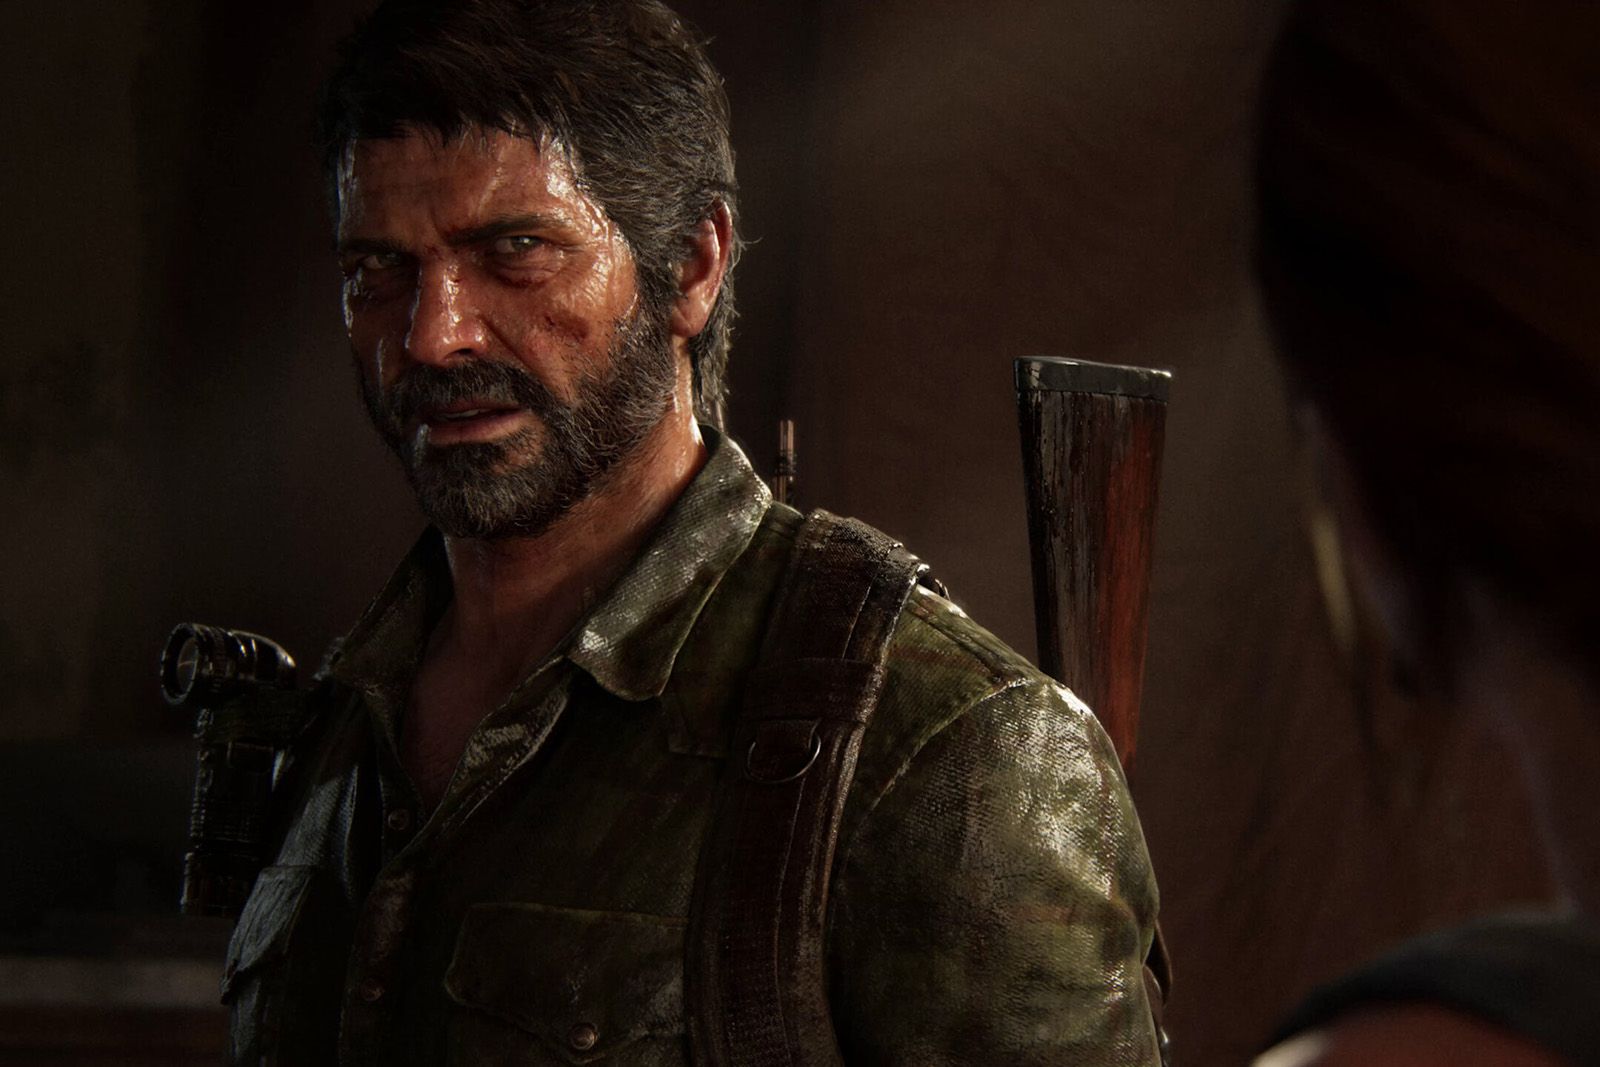 The Last of Us Part I gets delayed on PC, but not for long